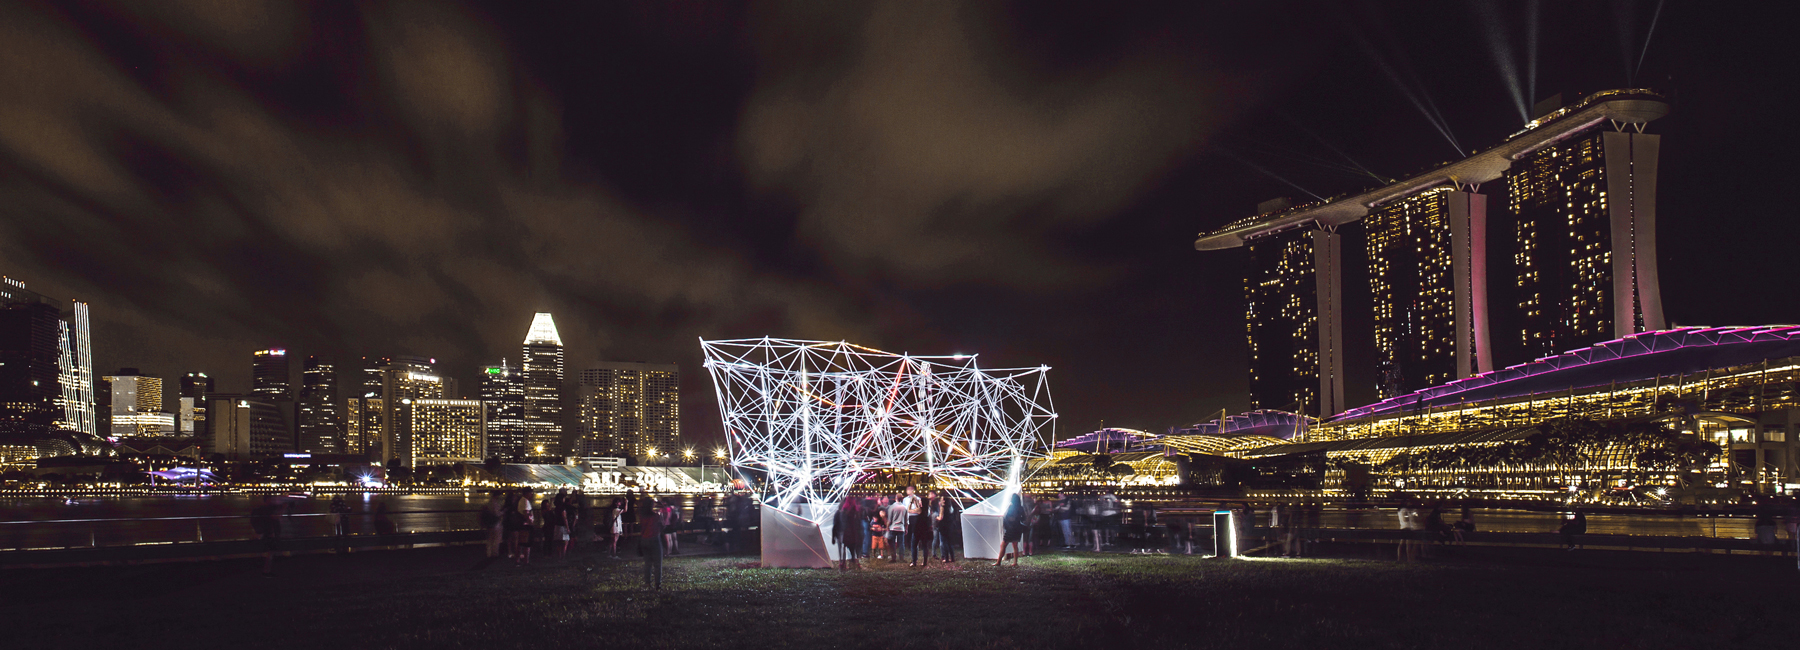 Marina Bay Singapore Gets Lit Up by a 3D Lighting Exhibition